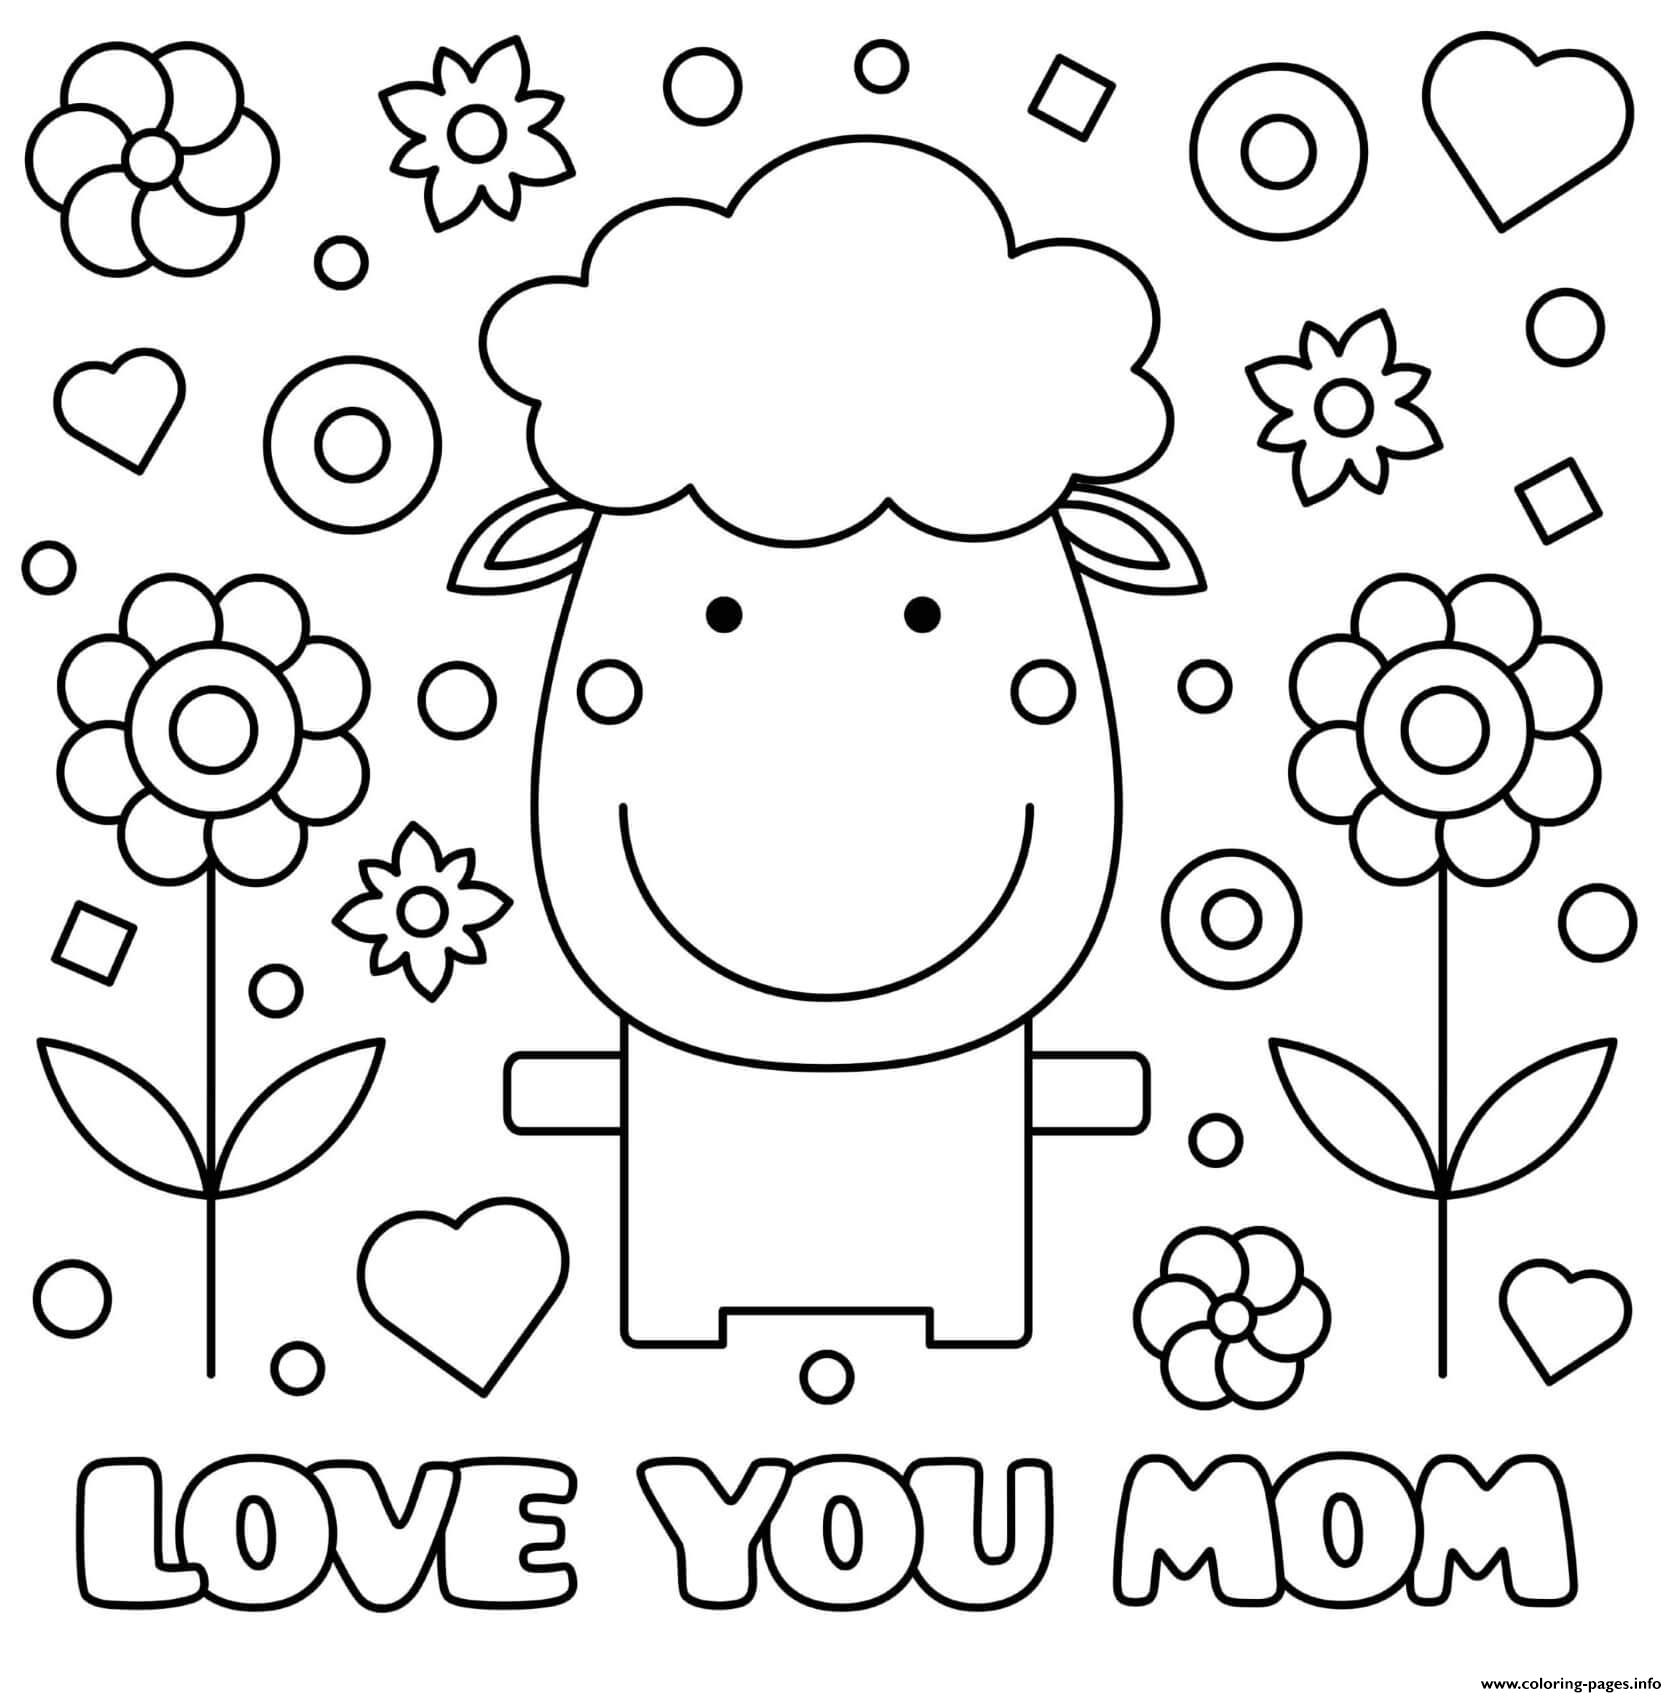 Mothers Day Sheep Flowers Hearts Love You Mom coloring